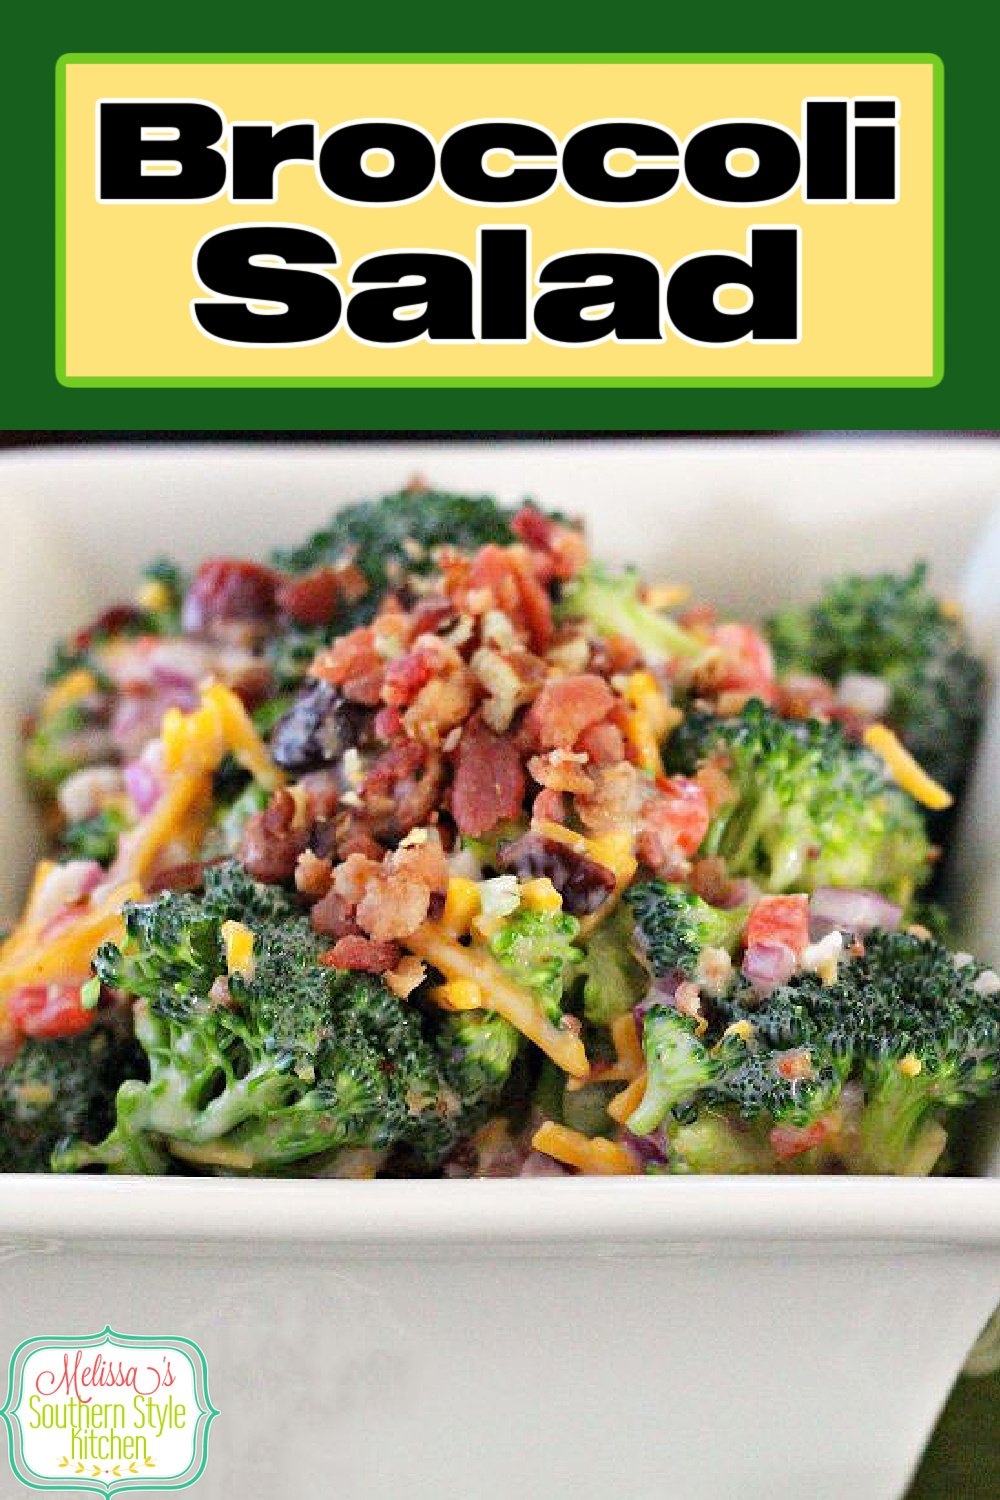 This Broccoli Salad recipe is filled with bacon, cheddar cheese and toasted pecans for the perfect side dish for any meal #broccolisalad #broccolirecipes #bacon #salads #picnicfood #saladrecipes #broccolirecipes #sidedishrecies #dinnerideas #southernfood #southernrecipes via @melissasssk